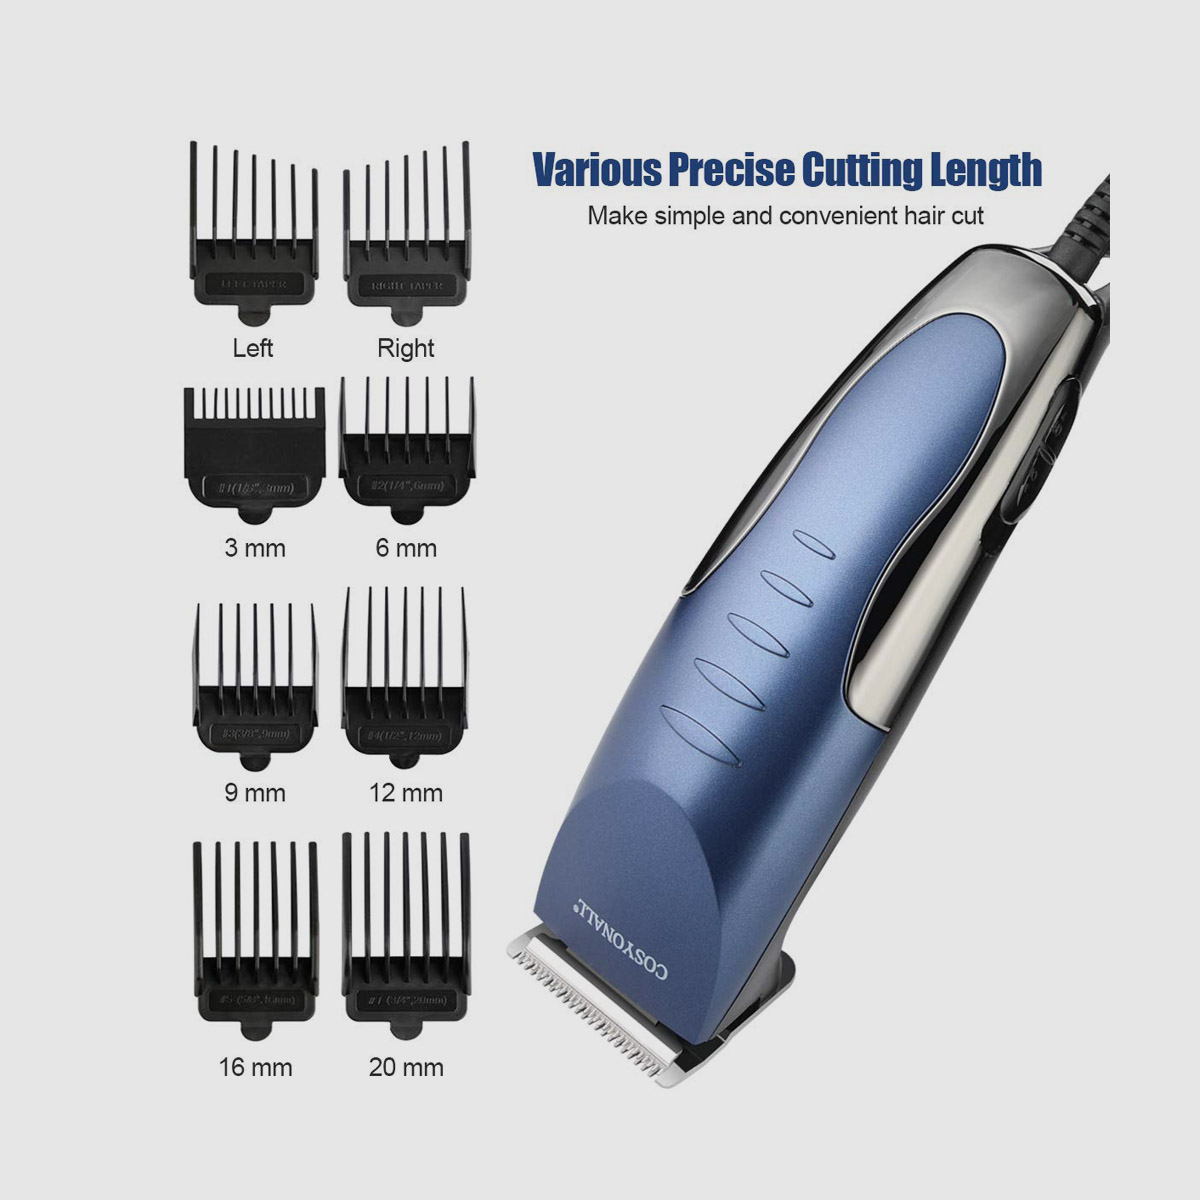 Pro Corded Hair Trimmer Cutting Kit - 2